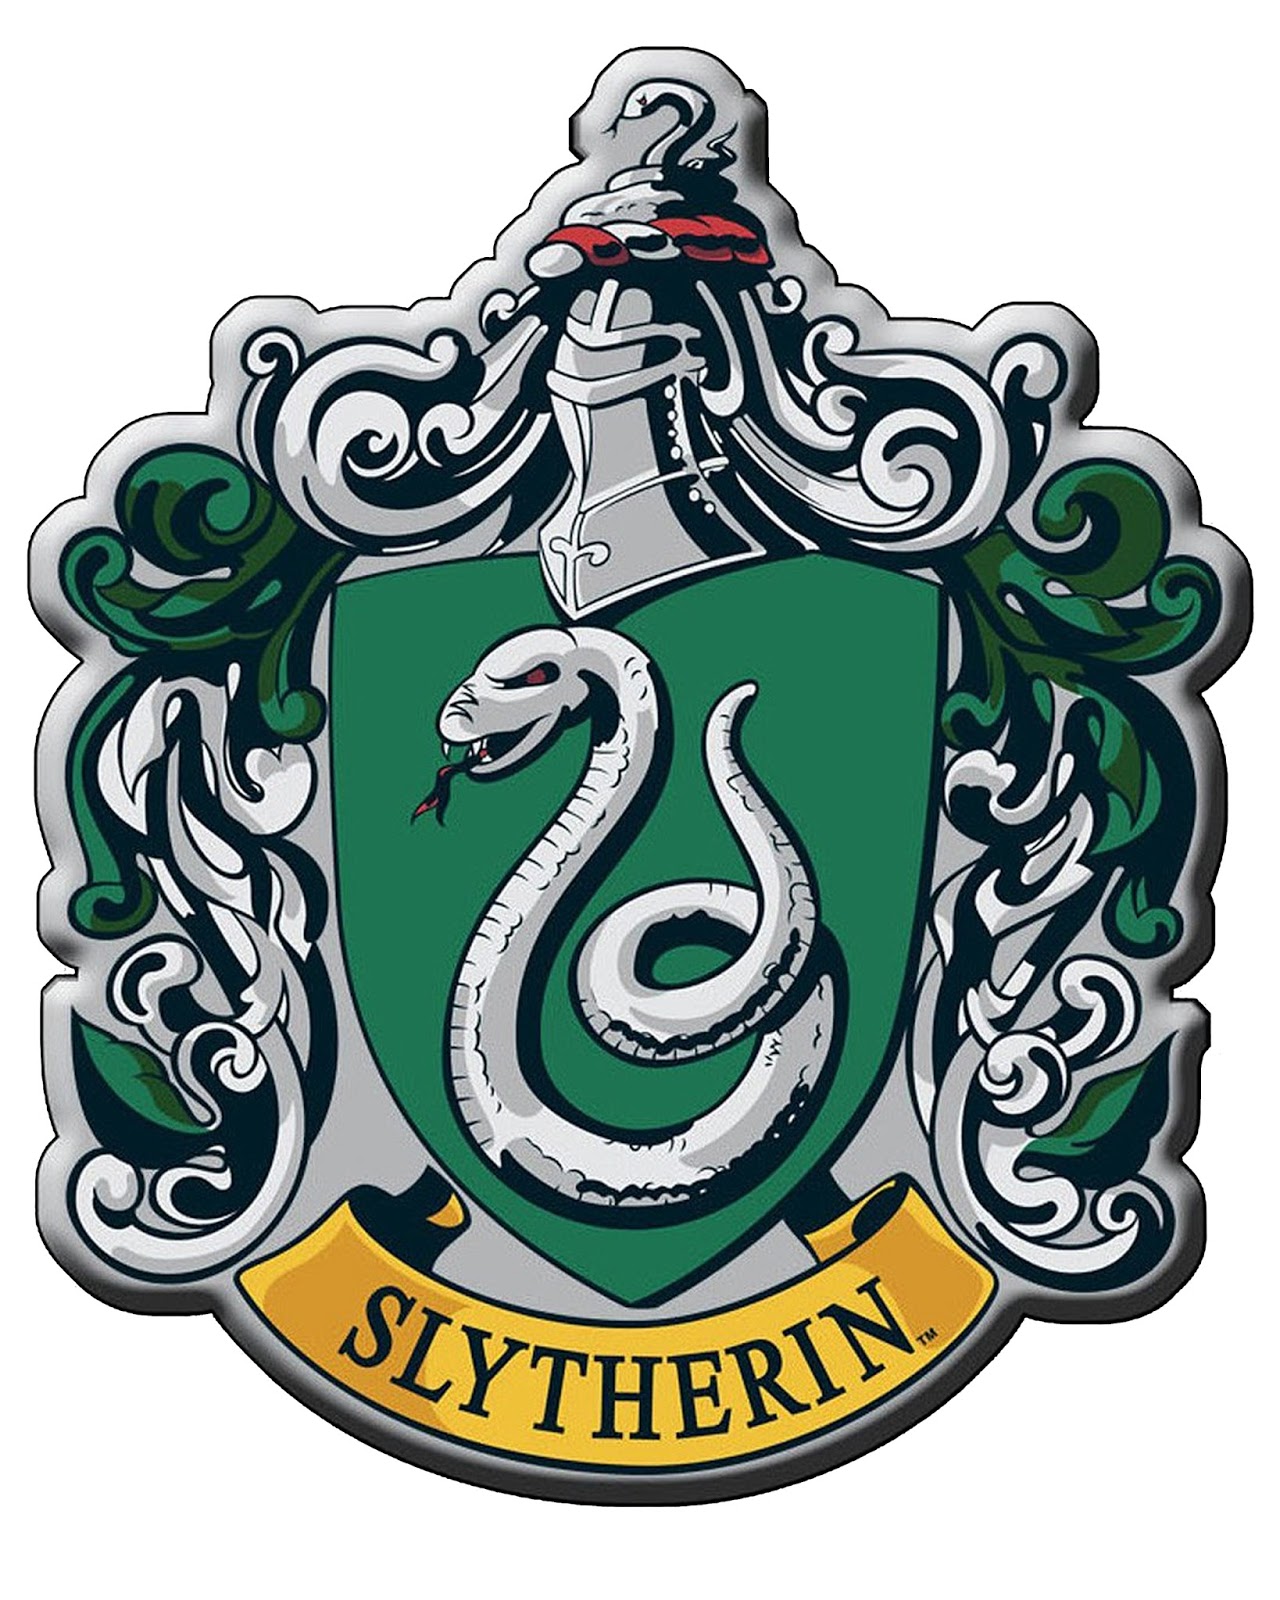 Download Slytherin Vector at Vectorified.com | Collection of ...